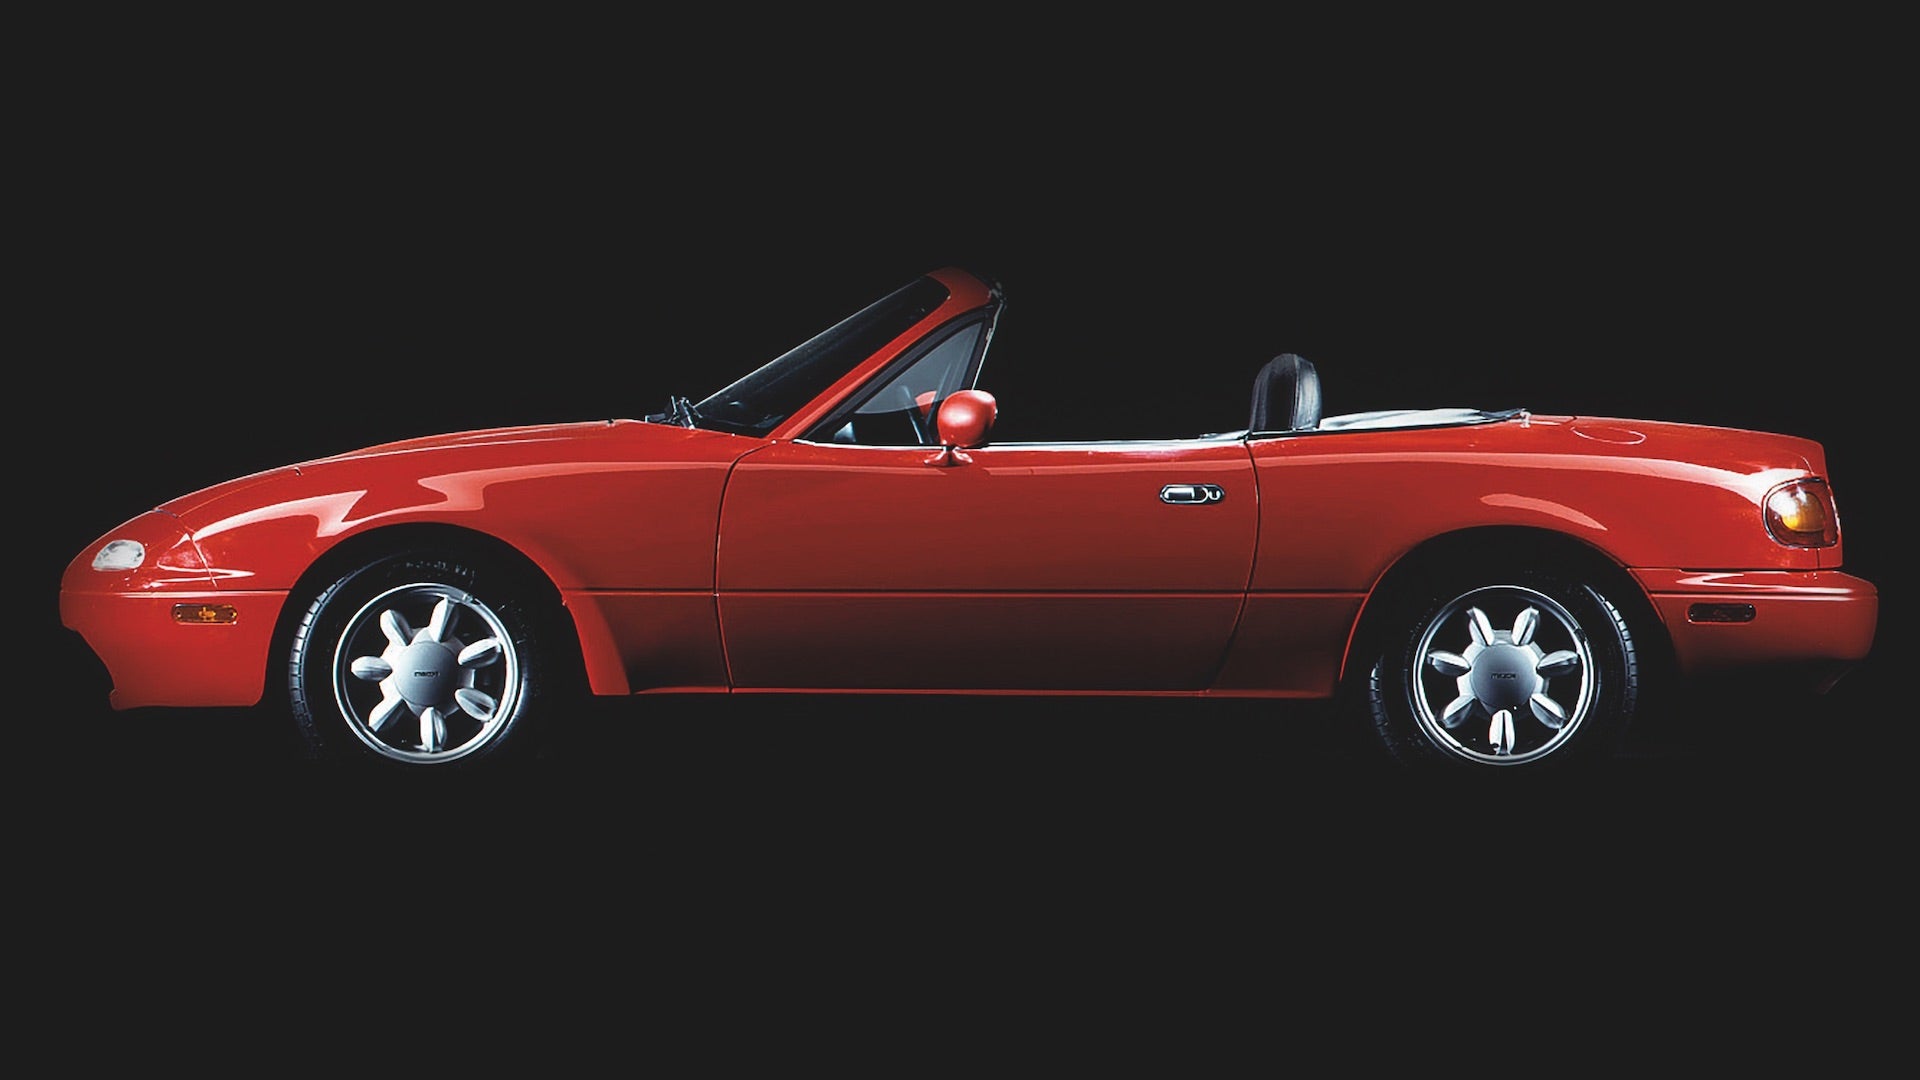 Today marks the 35th anniversary of the Mazda MX-5. Let’s take a look at how this iconic car has evolved over the years.